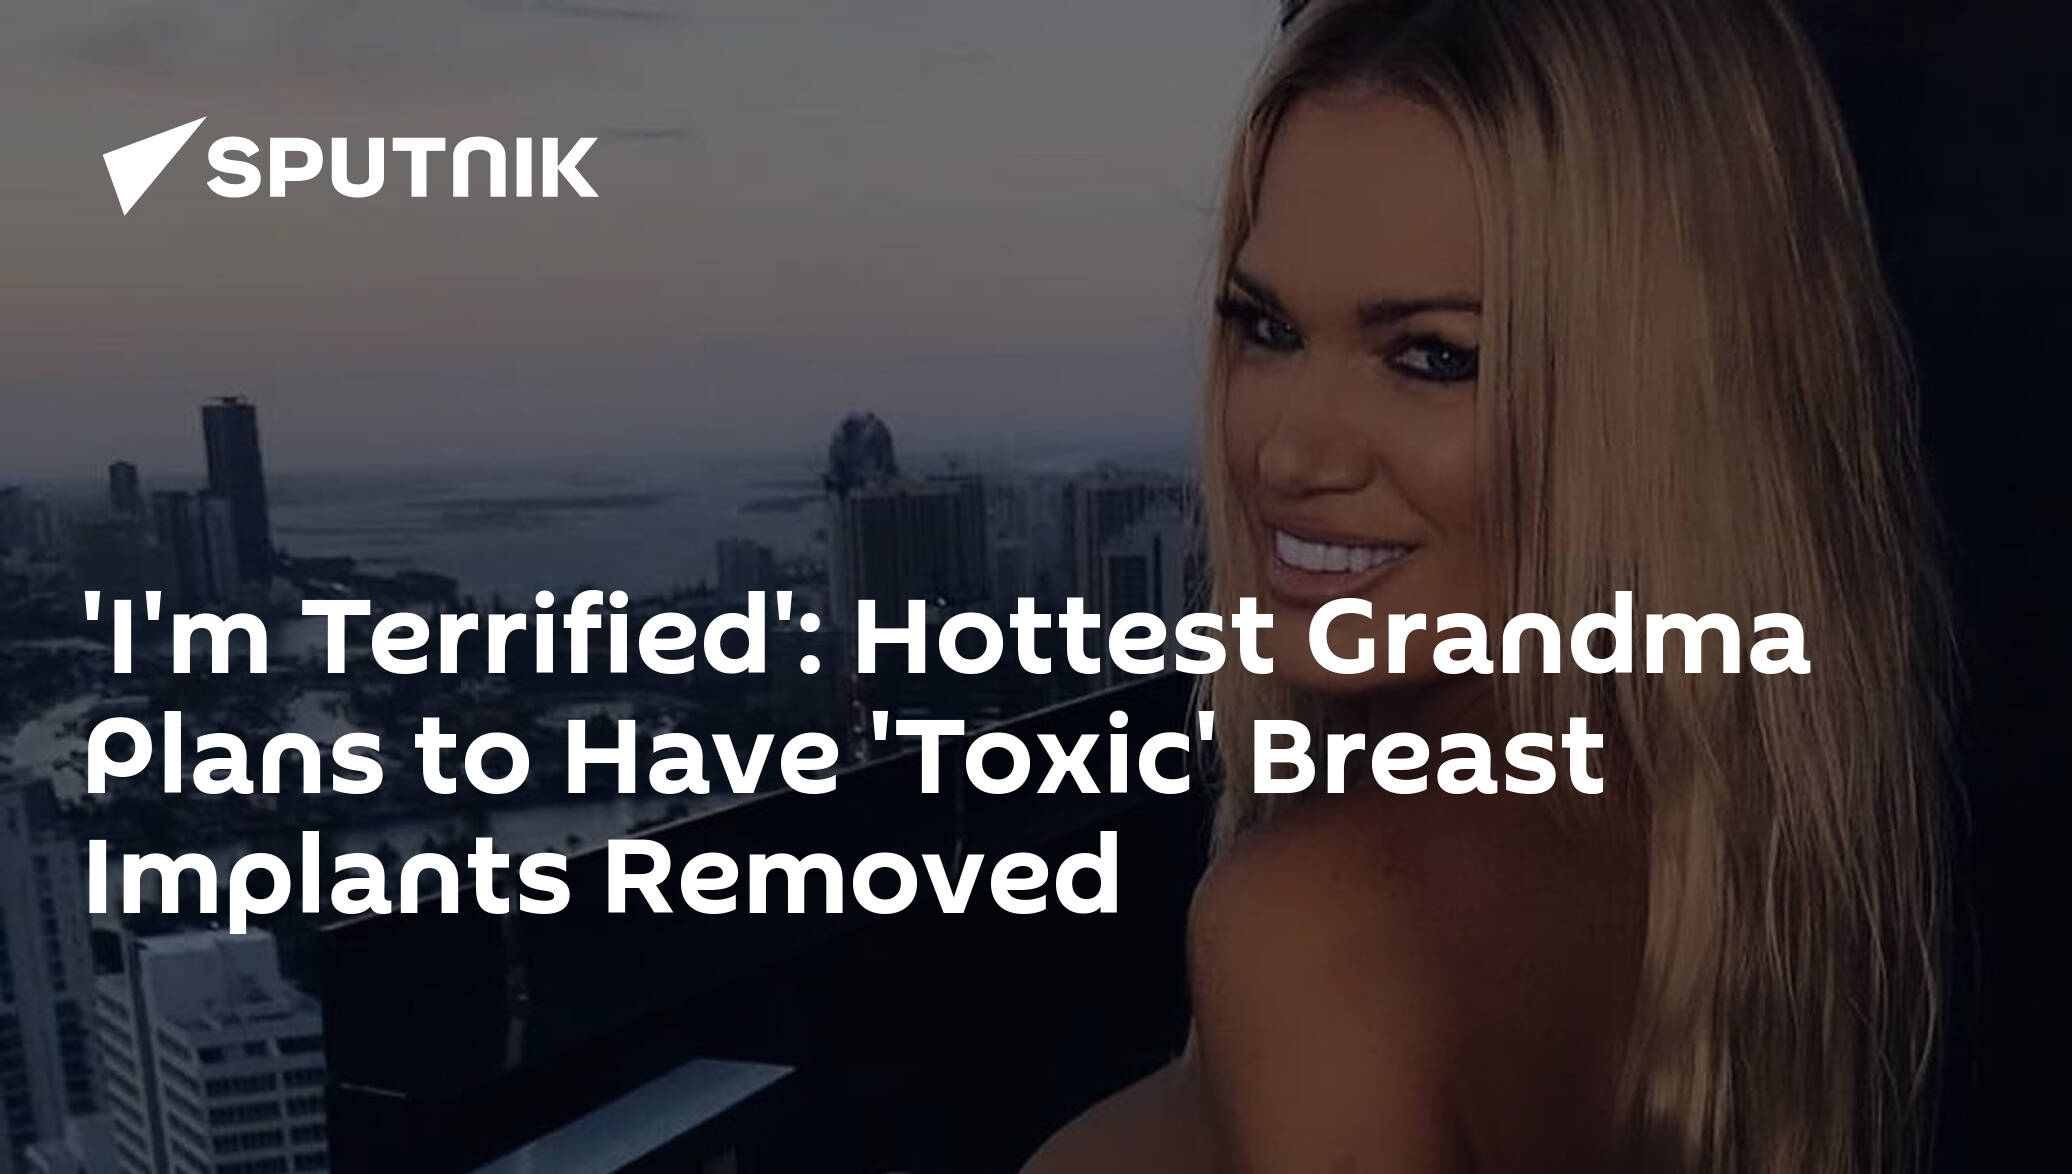 I'm Terrified': Hottest Grandma Plans to Have 'Toxic' Breast